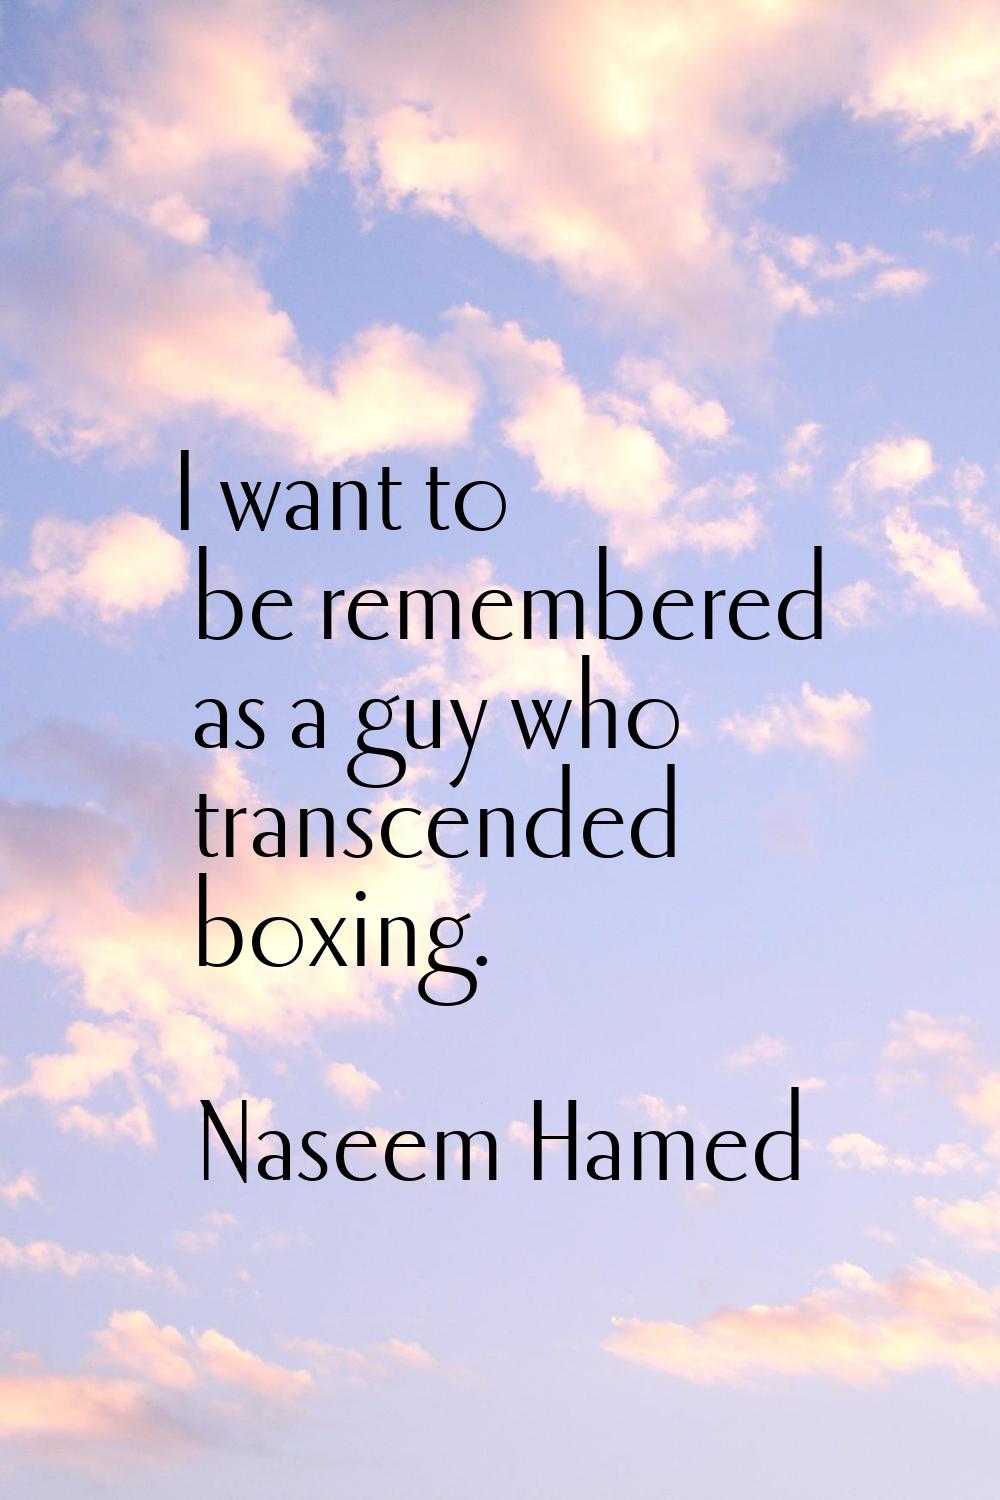 I want to be remembered as a guy who transcended boxing.